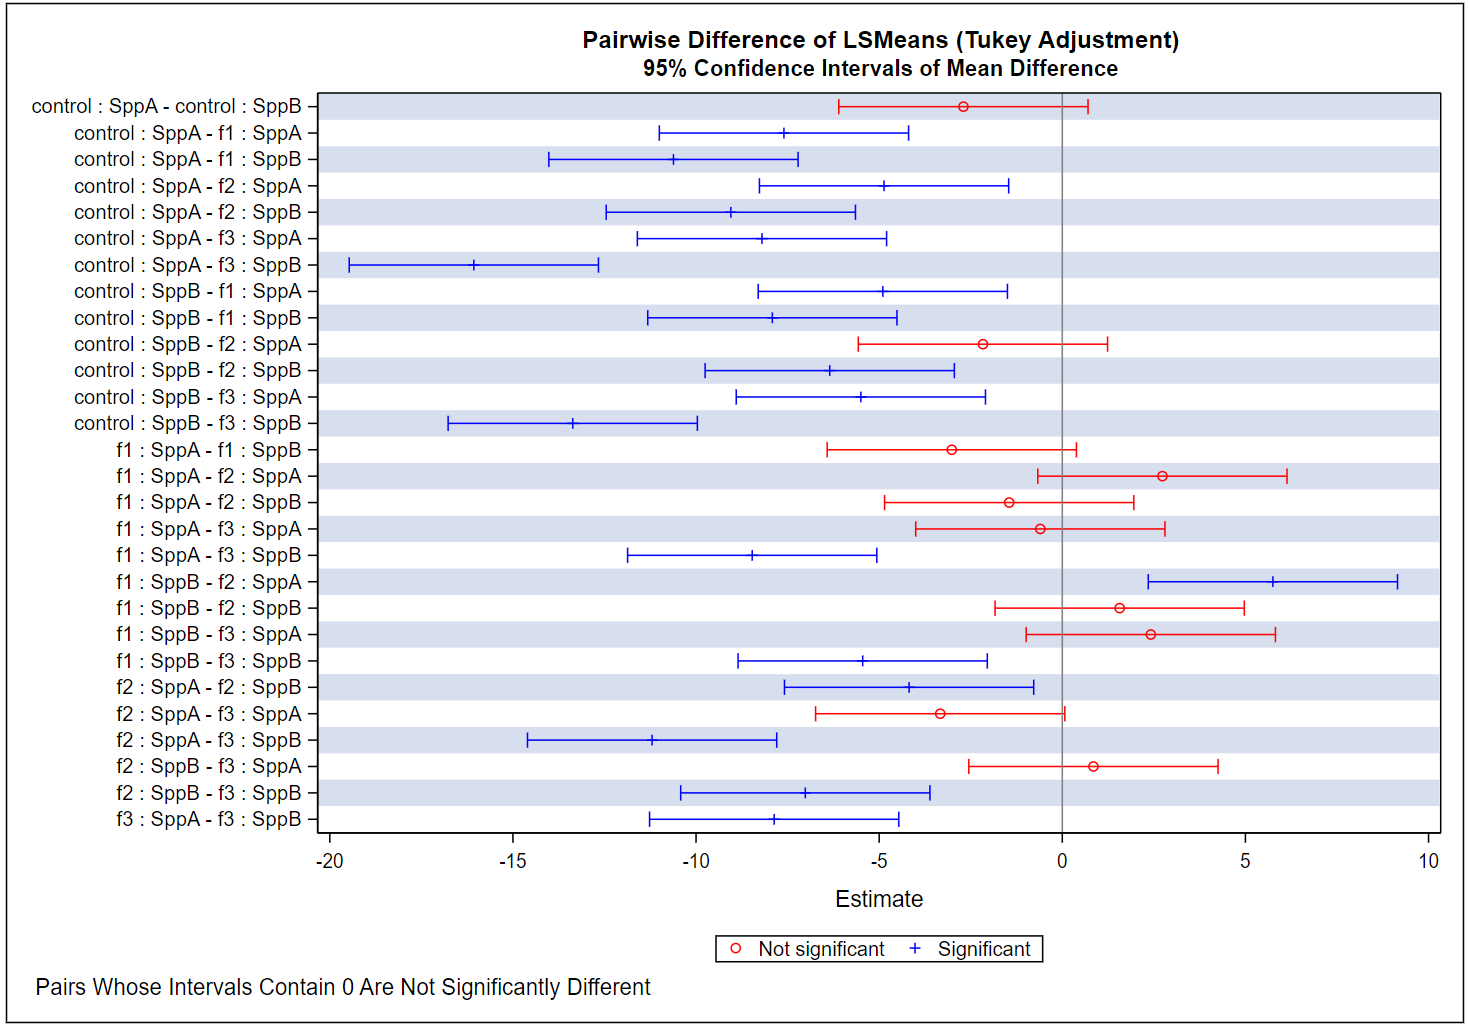 Pairwise differences of LSmeans with Tukey adjustment, showing 95% confidence intervals of mean difference.